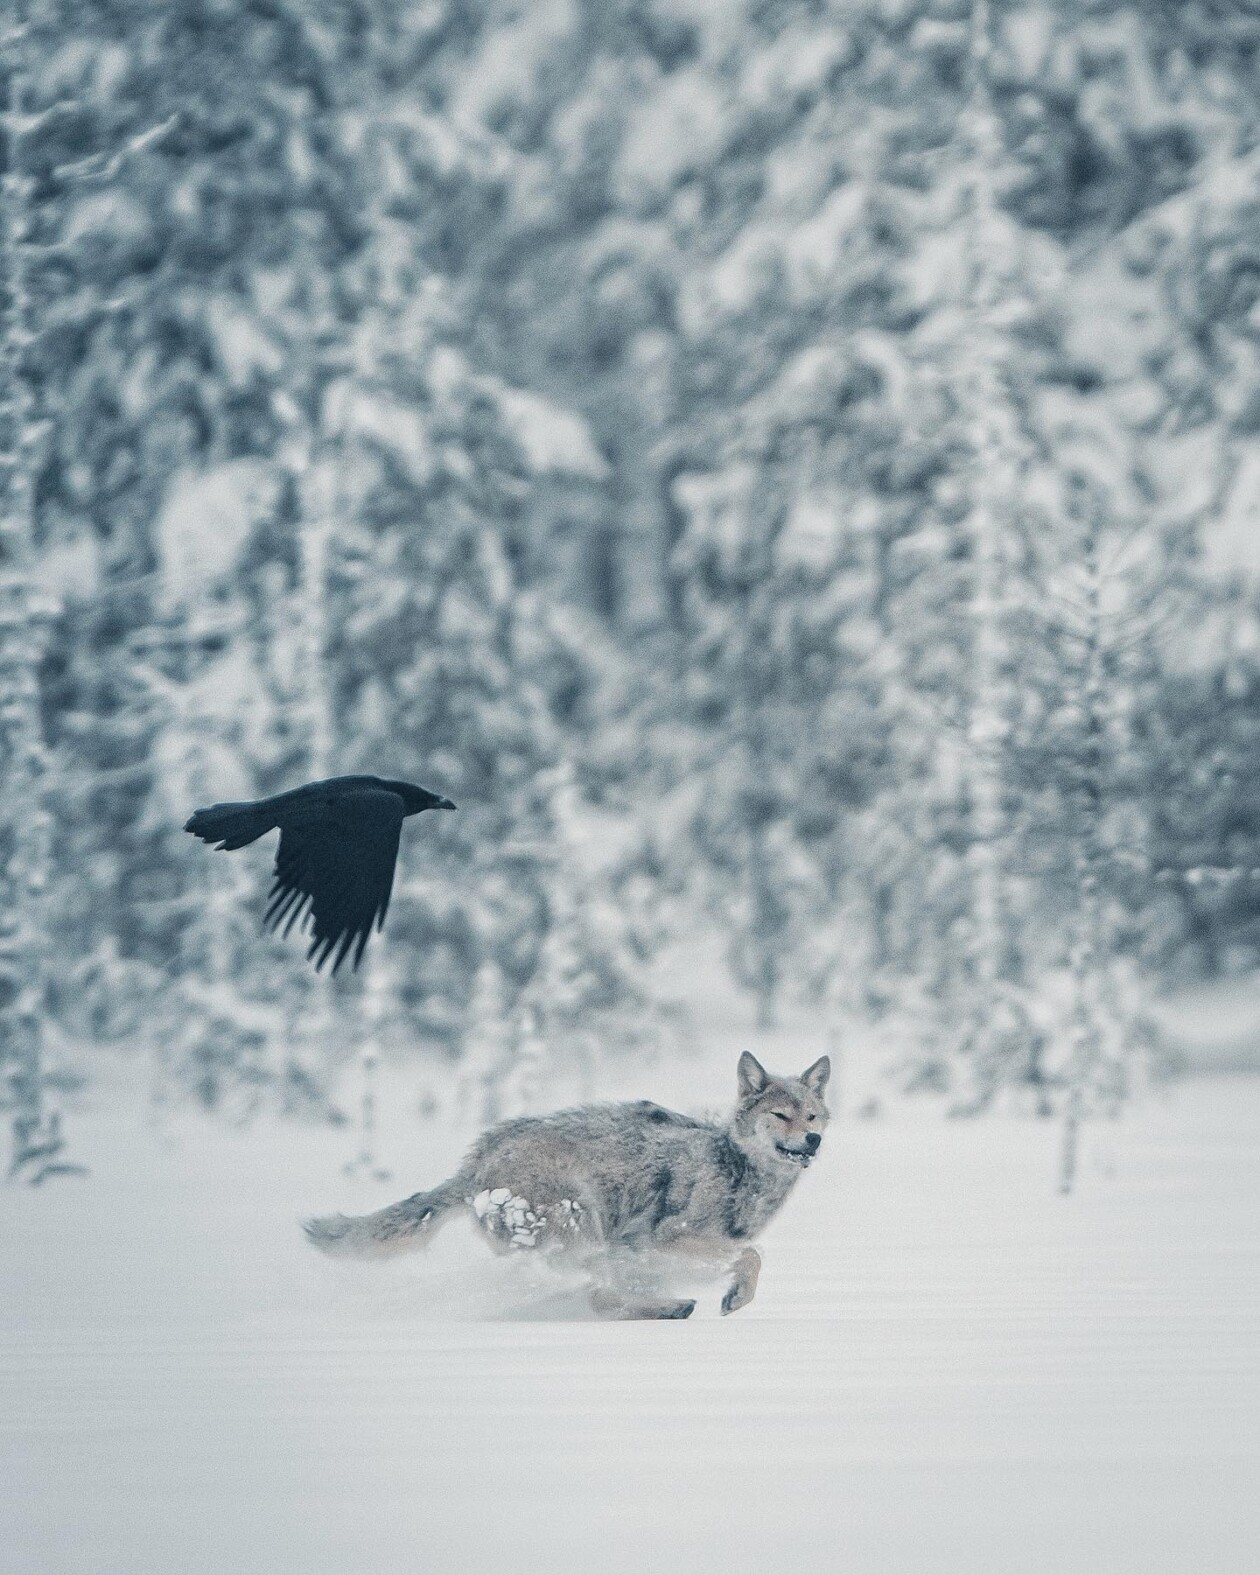 Captivating Pictures Of Arctic Animals By Konsta Punkka (1)